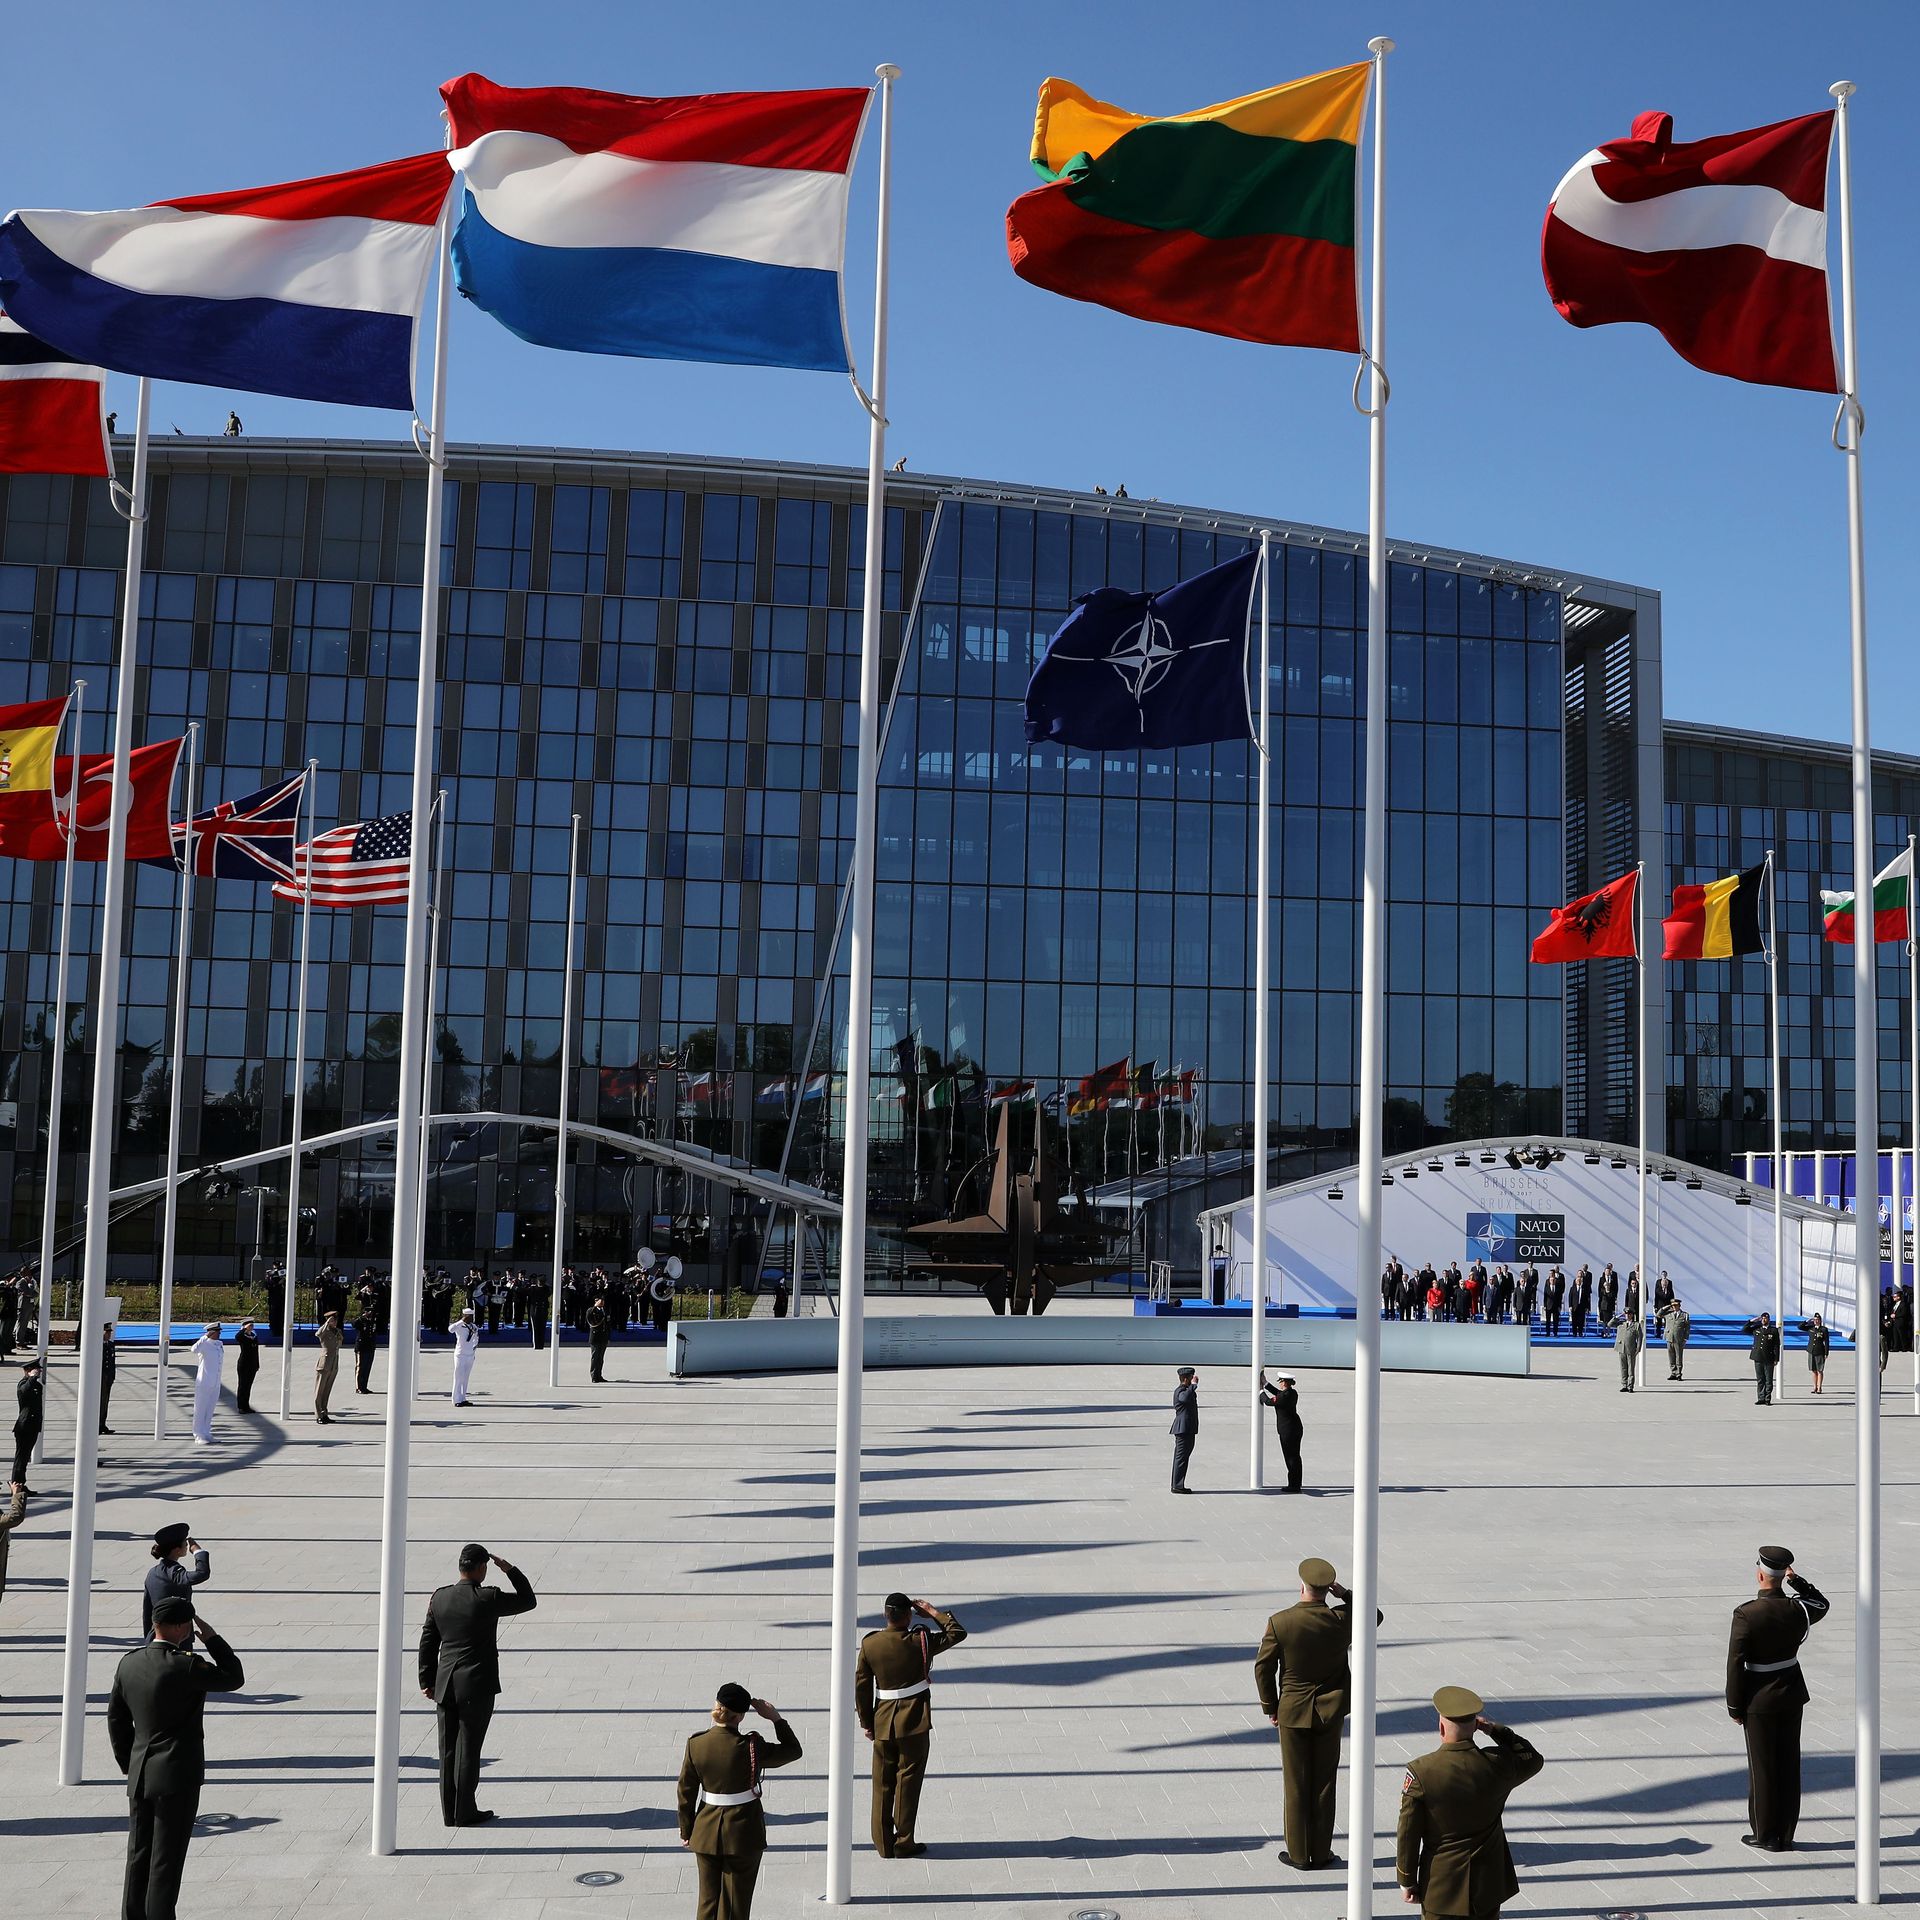 NATO headquarters, with circle of flagpoles and soldiers at attention